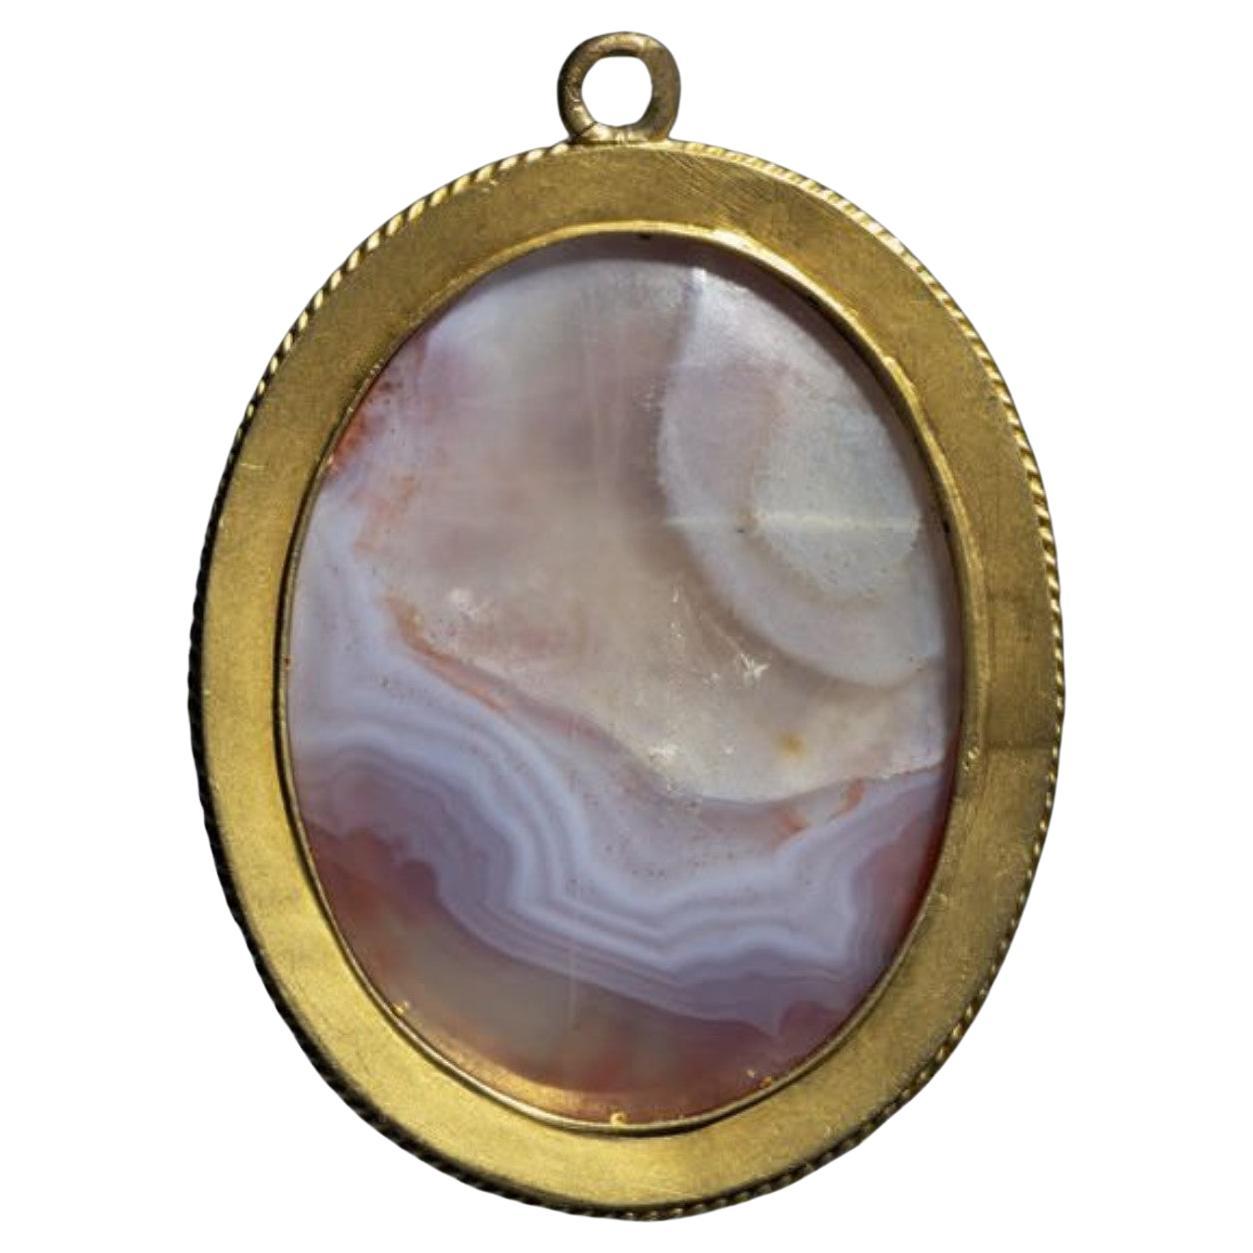 Two-layered agate cameo, red and white, depicting Roman Charity on an amati background.
Italy, 16th century
H. 3.7 cm - L. 2.9 cm
Gold setting, eagle's head hallmark, 19th century
H. with setting 6 cm - W. 4.04 cm - Gross weight: 25.6 g
The subject